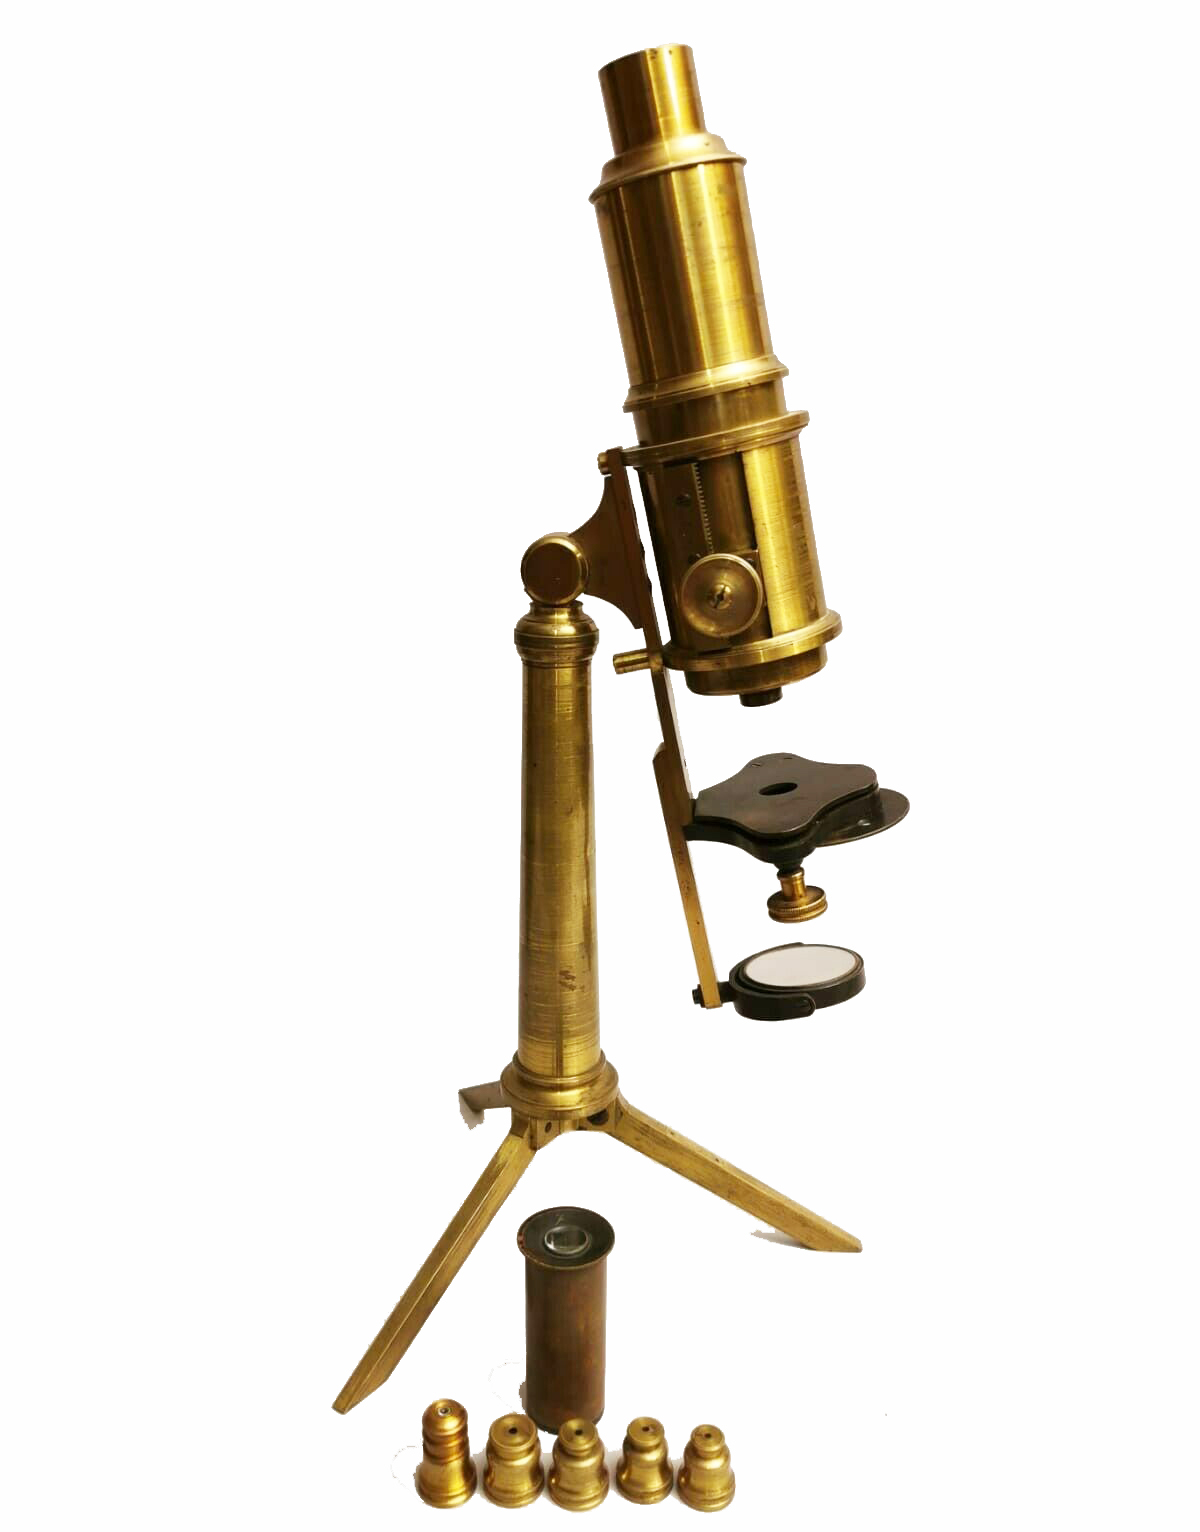 Compound Microscope and Accessories, Likely Dutch, c. 1790, Modified During the 1830s’ to become achromatic